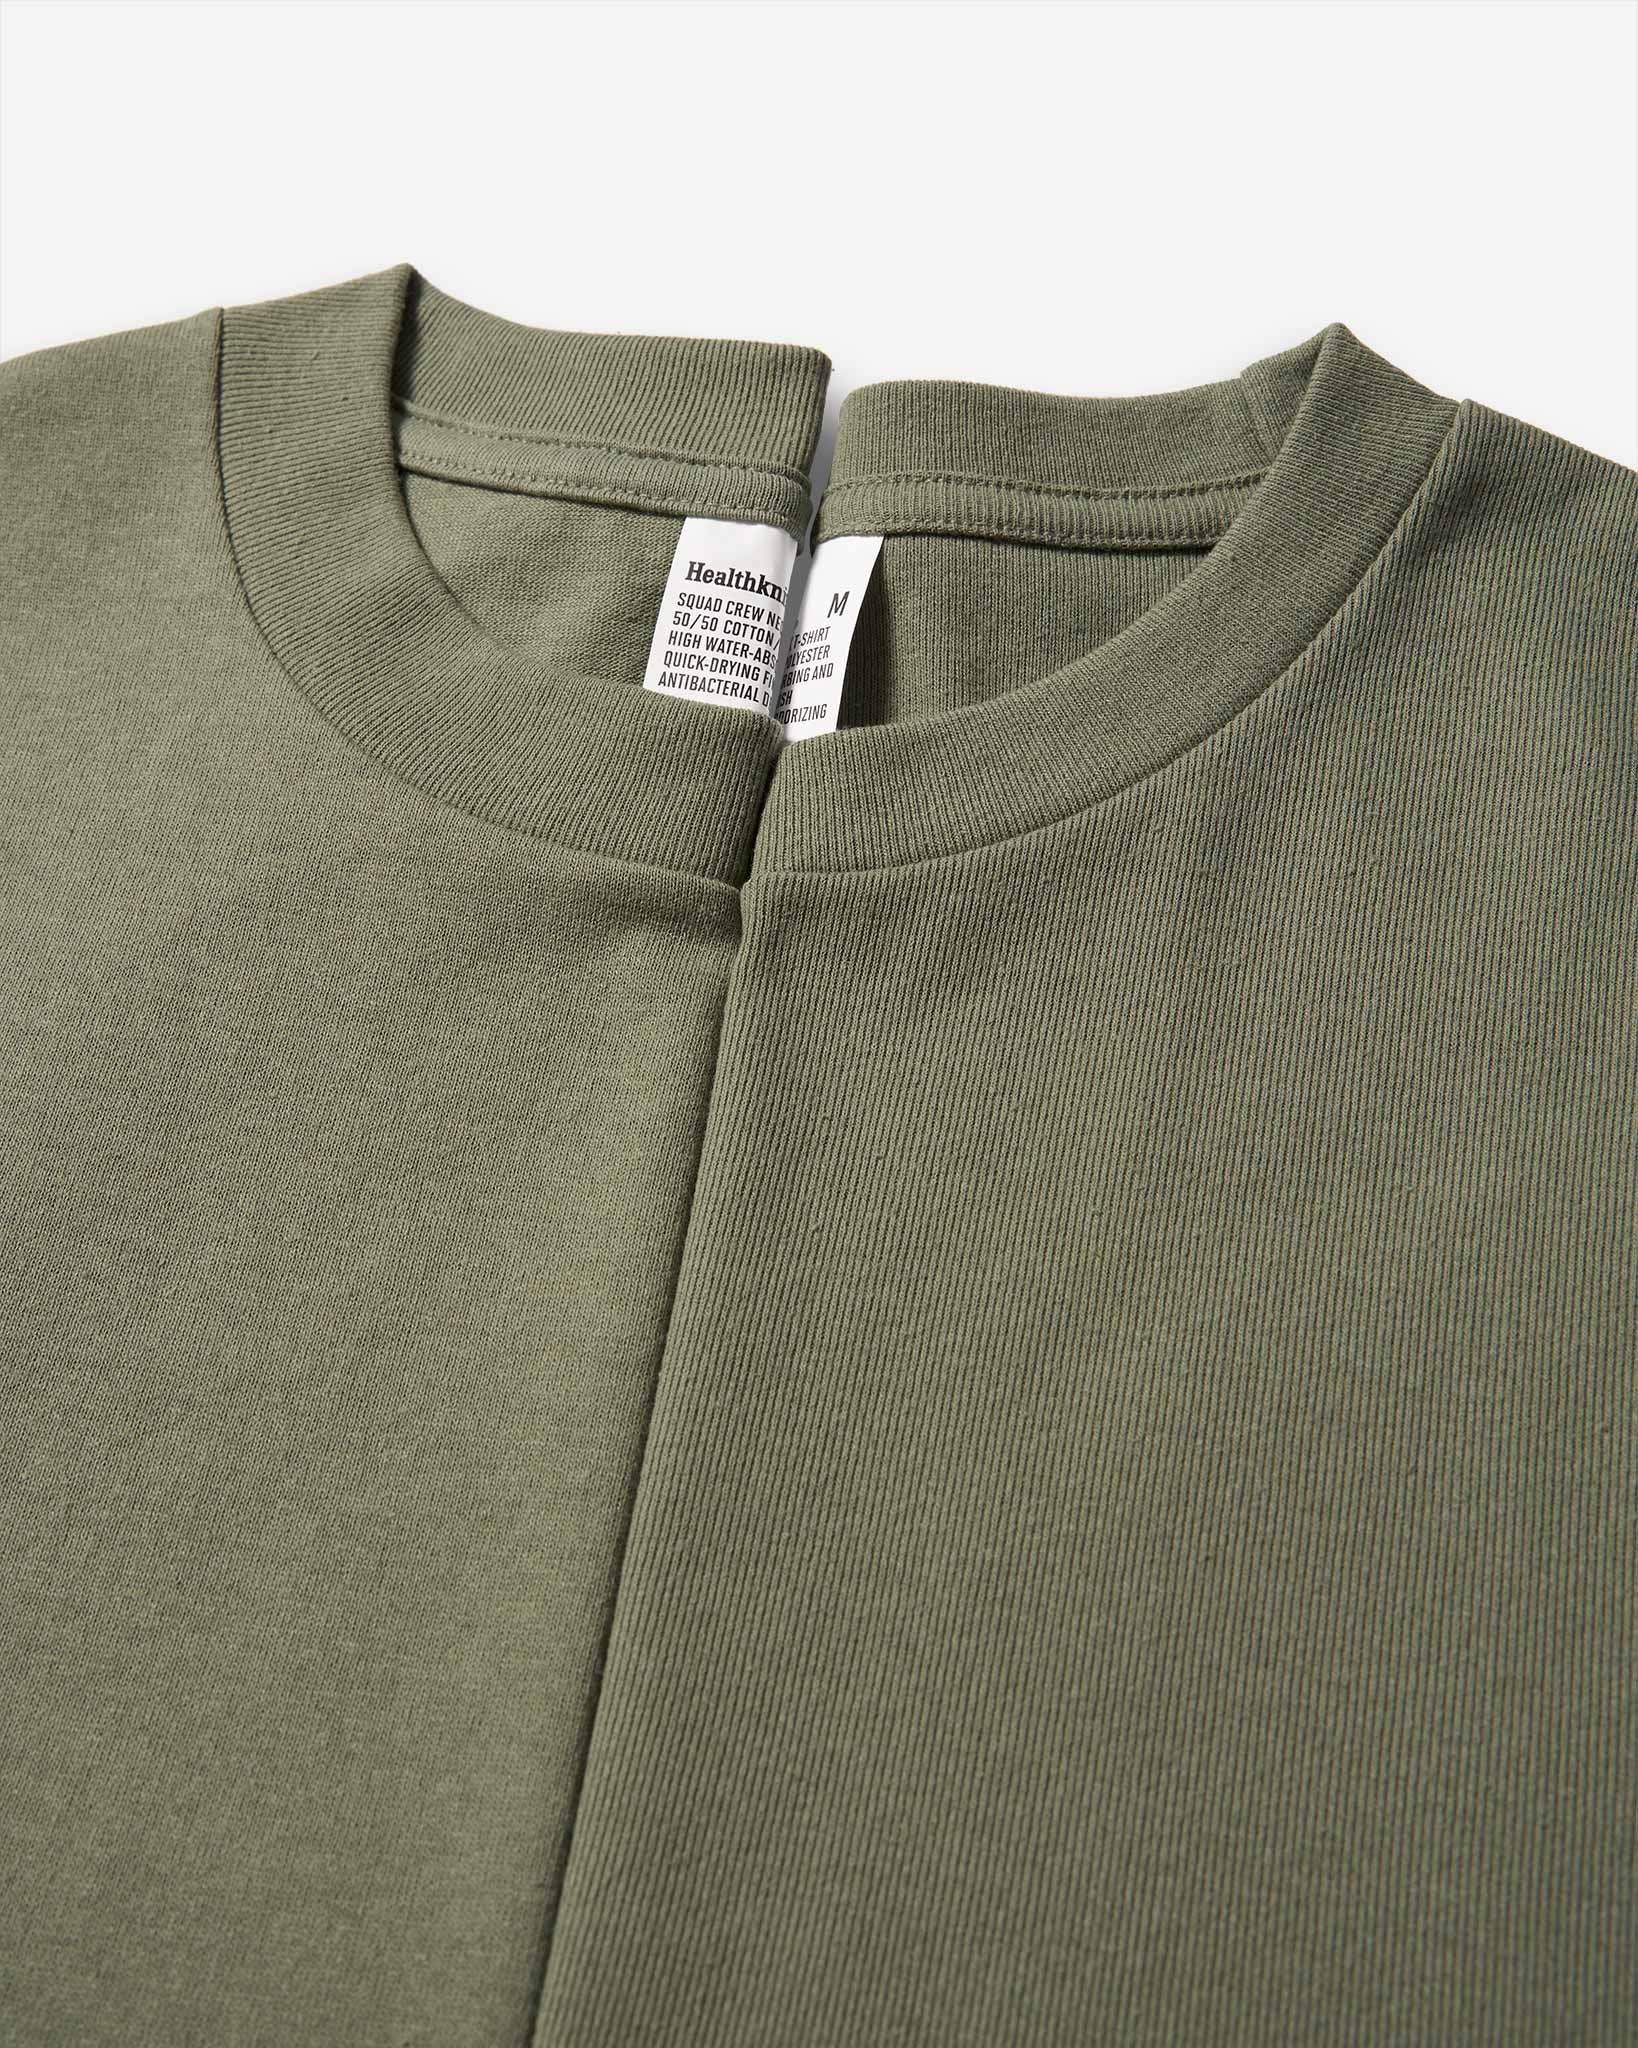 Military S/S Tees (2 Pack) - Foliage Green